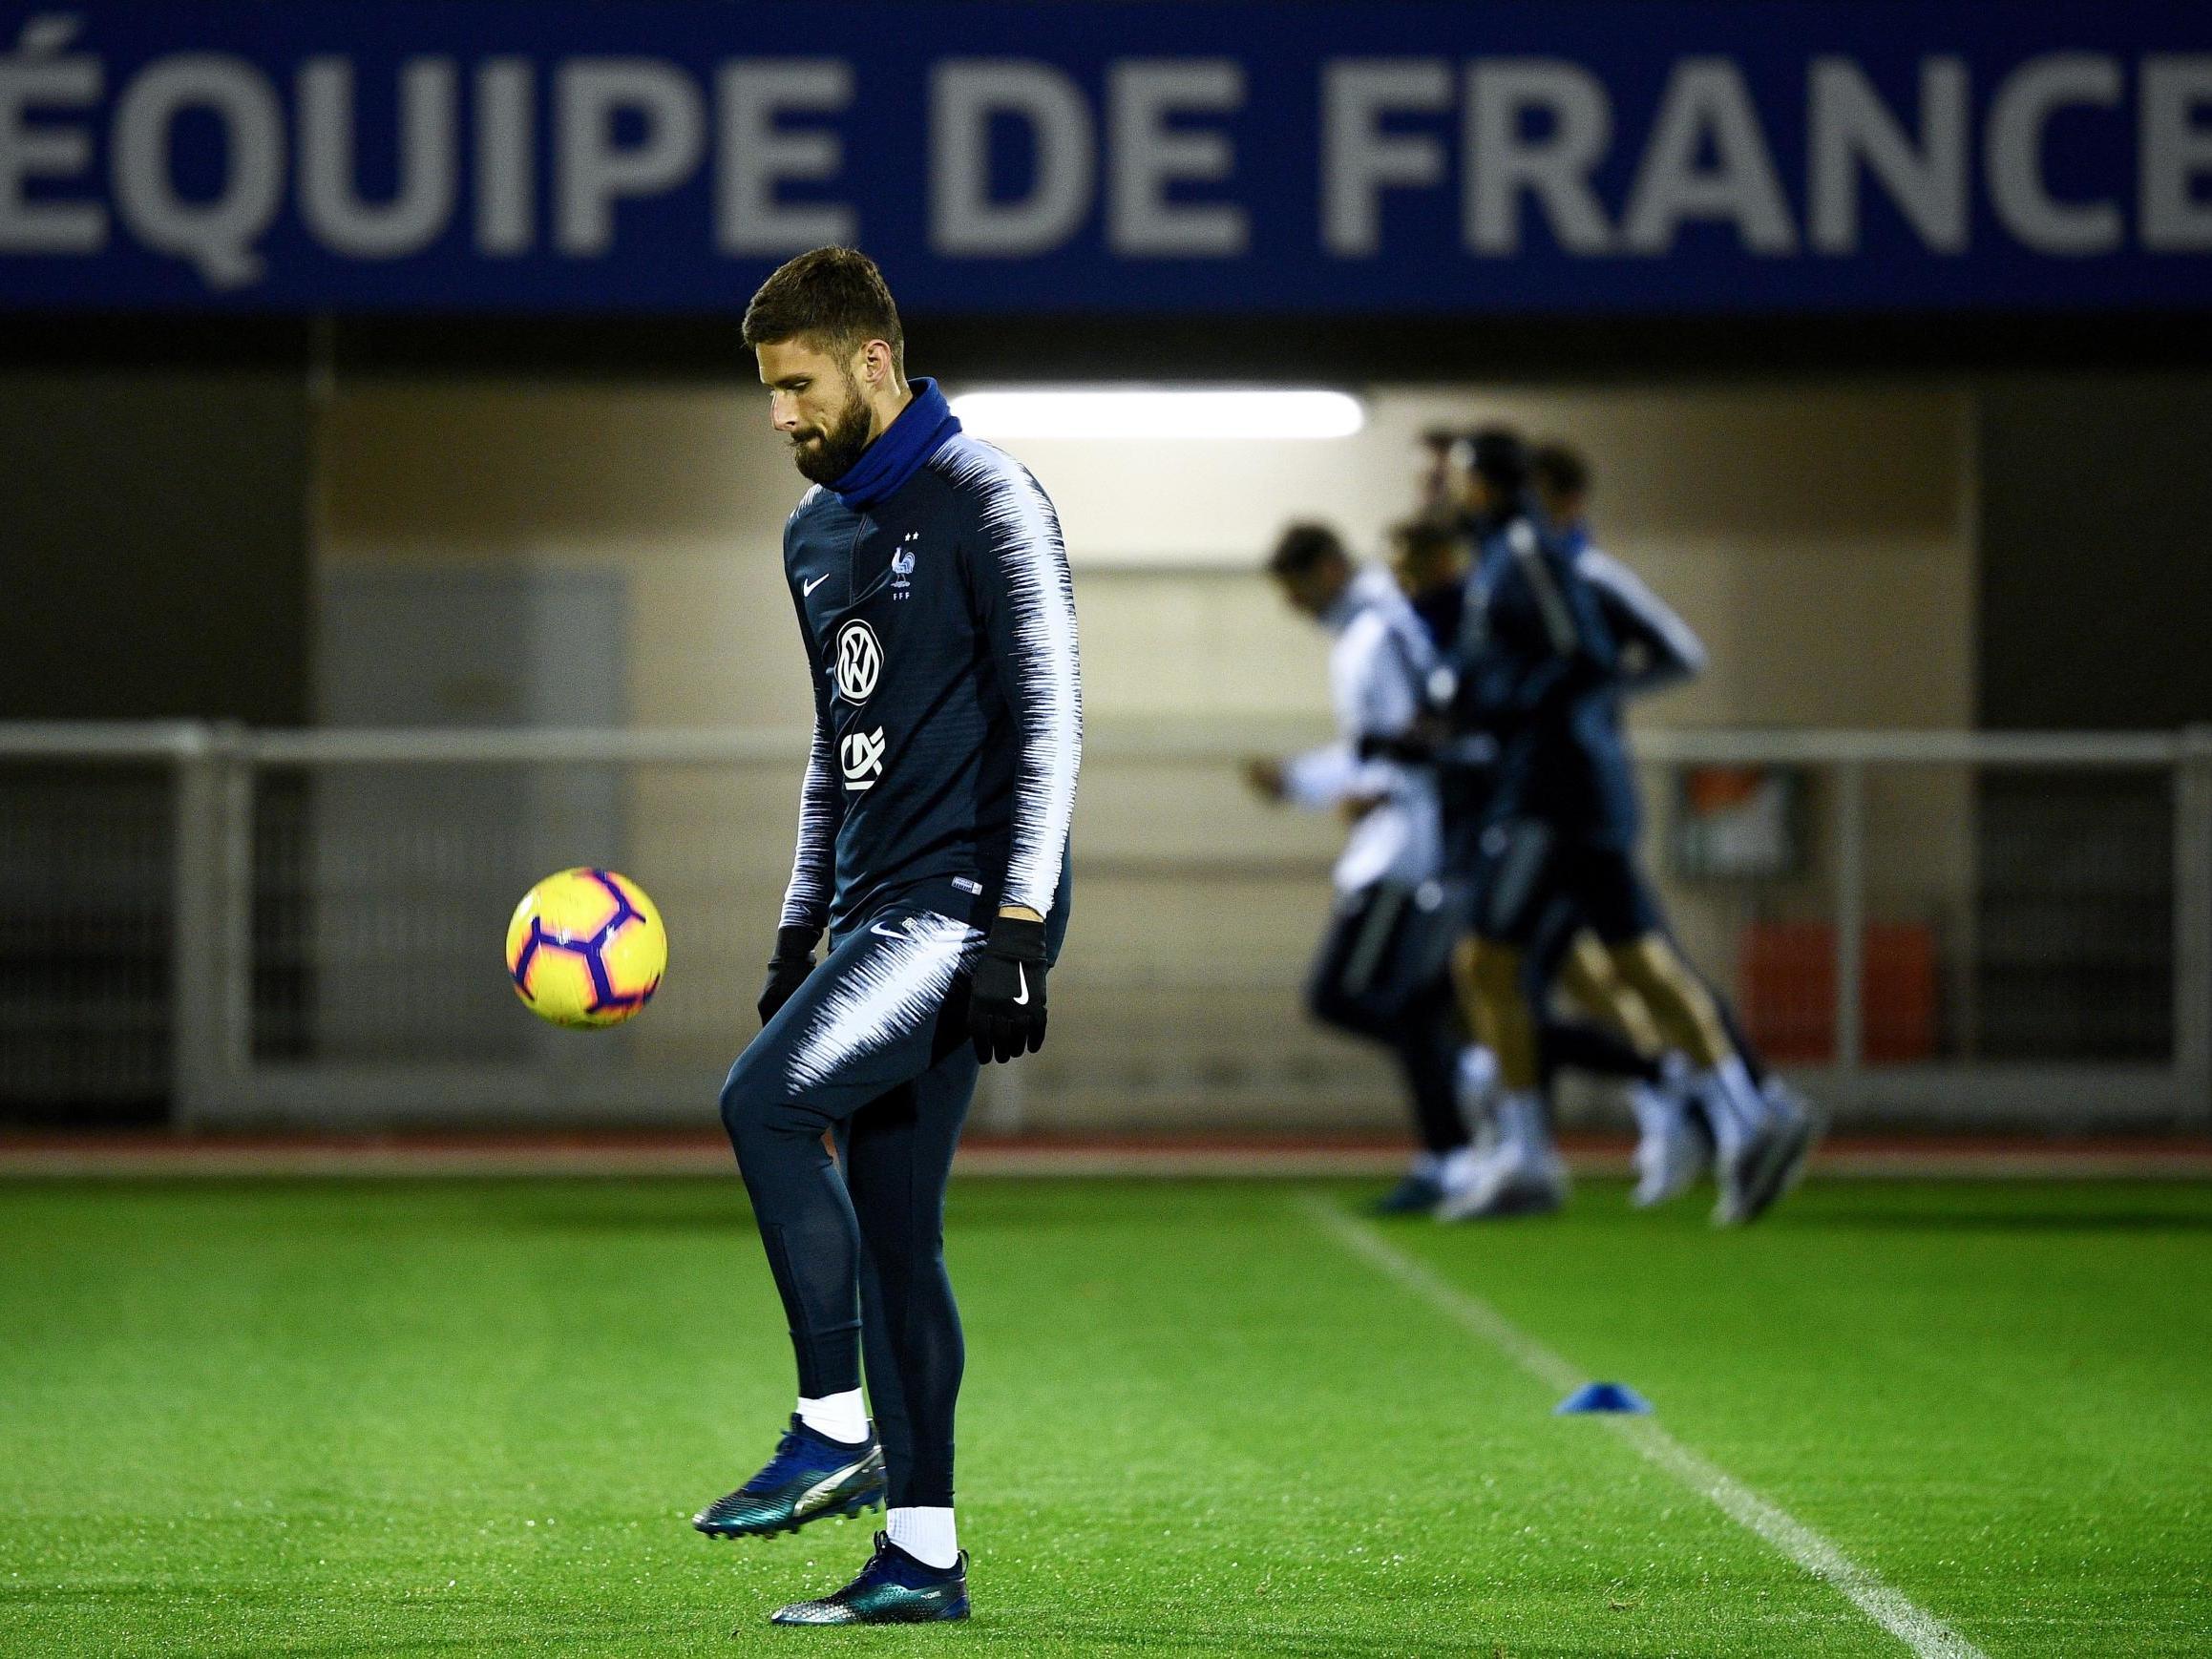 Giroud is currently on international duty with France ahead of their matches against the Netherlands and Uruguay